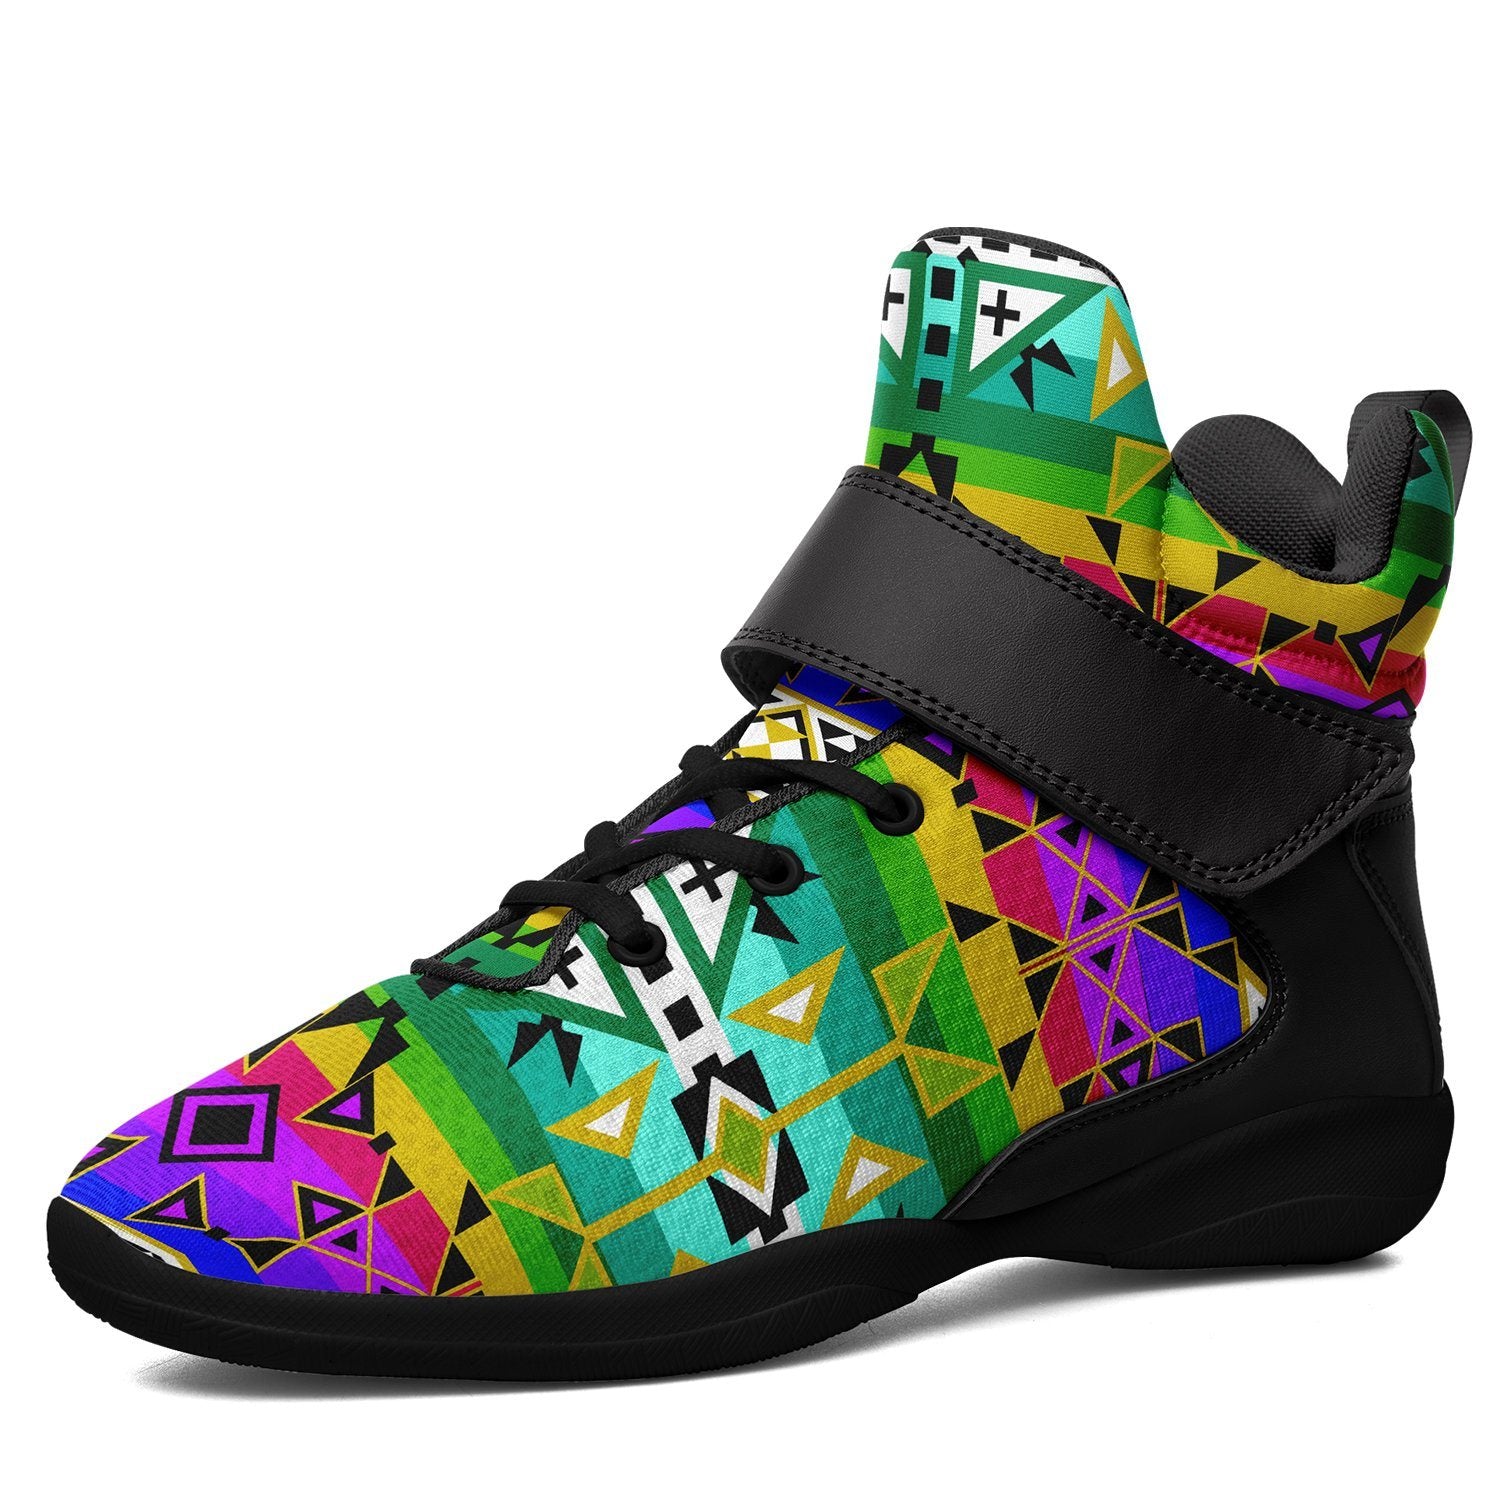 After the Northwest Rain Ipottaa Basketball / Sport High Top Shoes 49 Dzine US Women 4.5 / US Youth 3.5 / EUR 35 Black Sole with Black Strap 